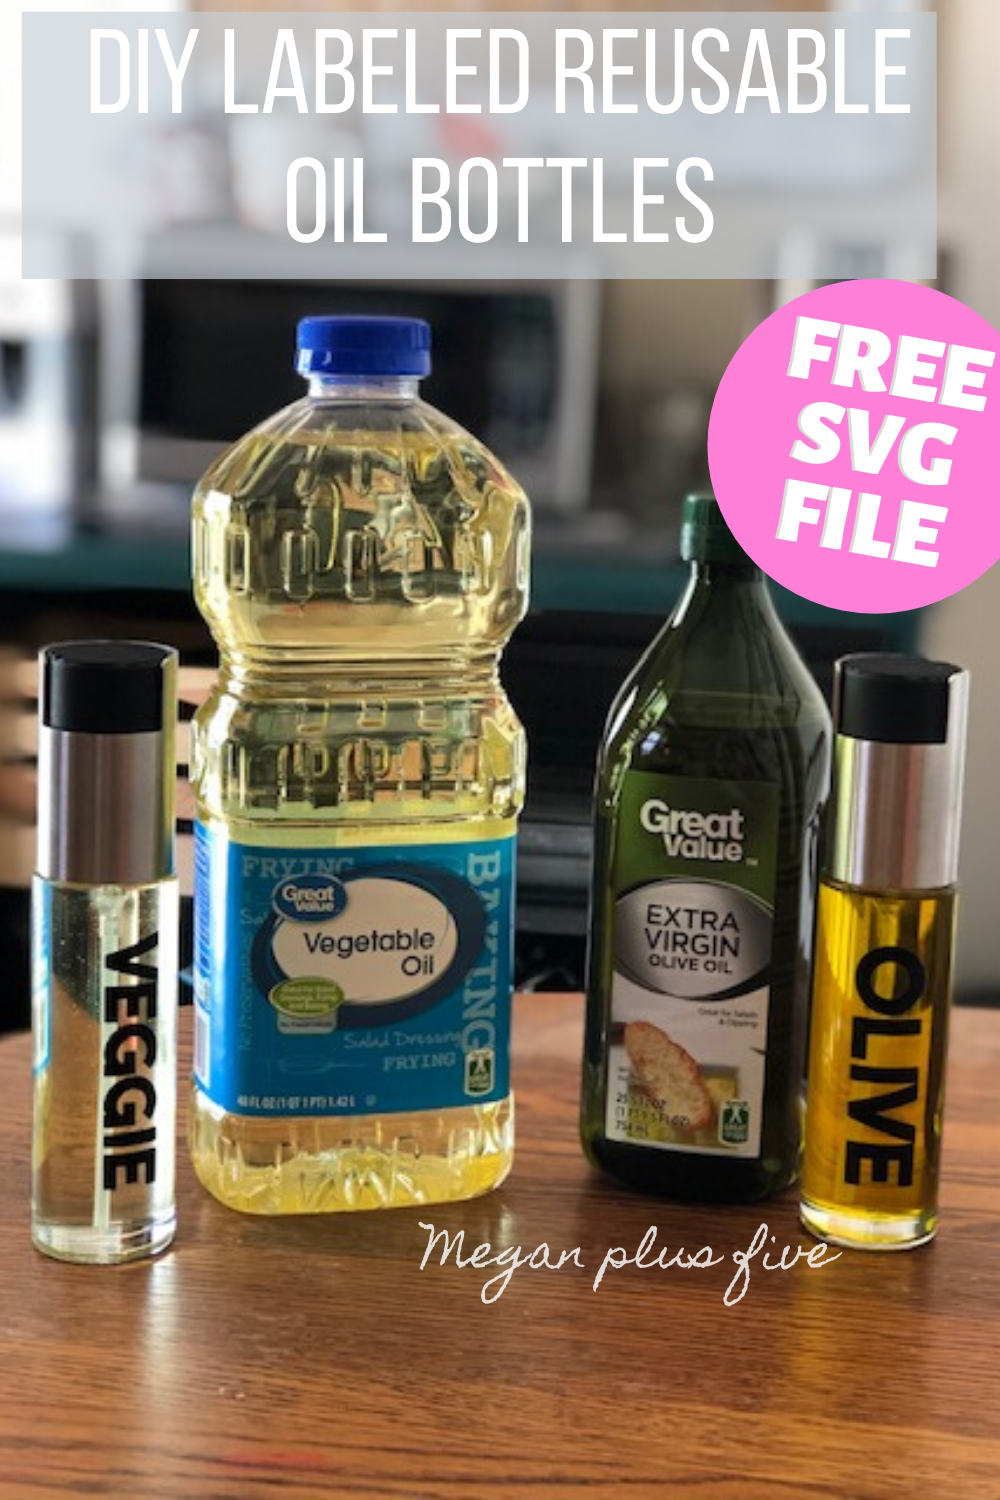 DIY labeled reusable oil spray bottles. How to make your own pam spray bottles for vegetable and olive oil for the kitchen. Plus a FREE svg file to download. Great small project to use for Cricut. Labeling kitchen with vinyl.